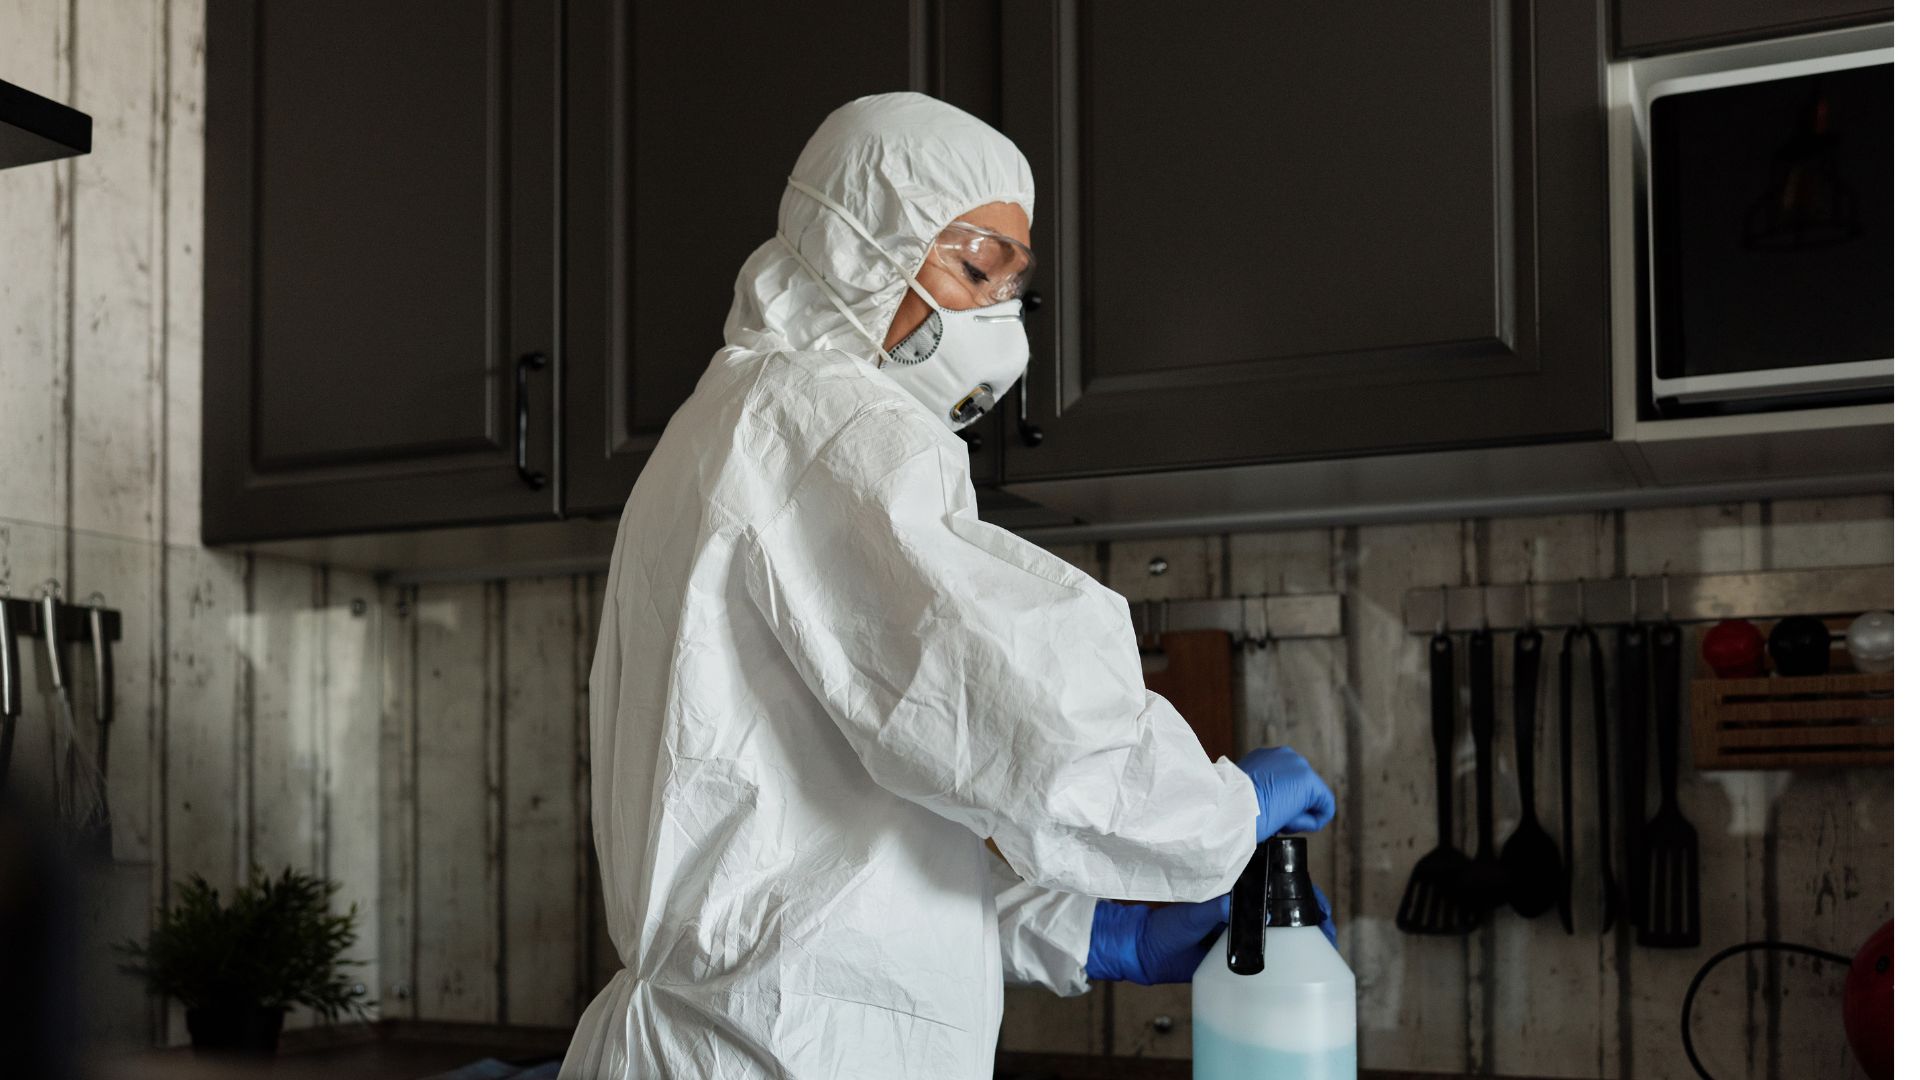 Disinfection with cleaner wearing PPE